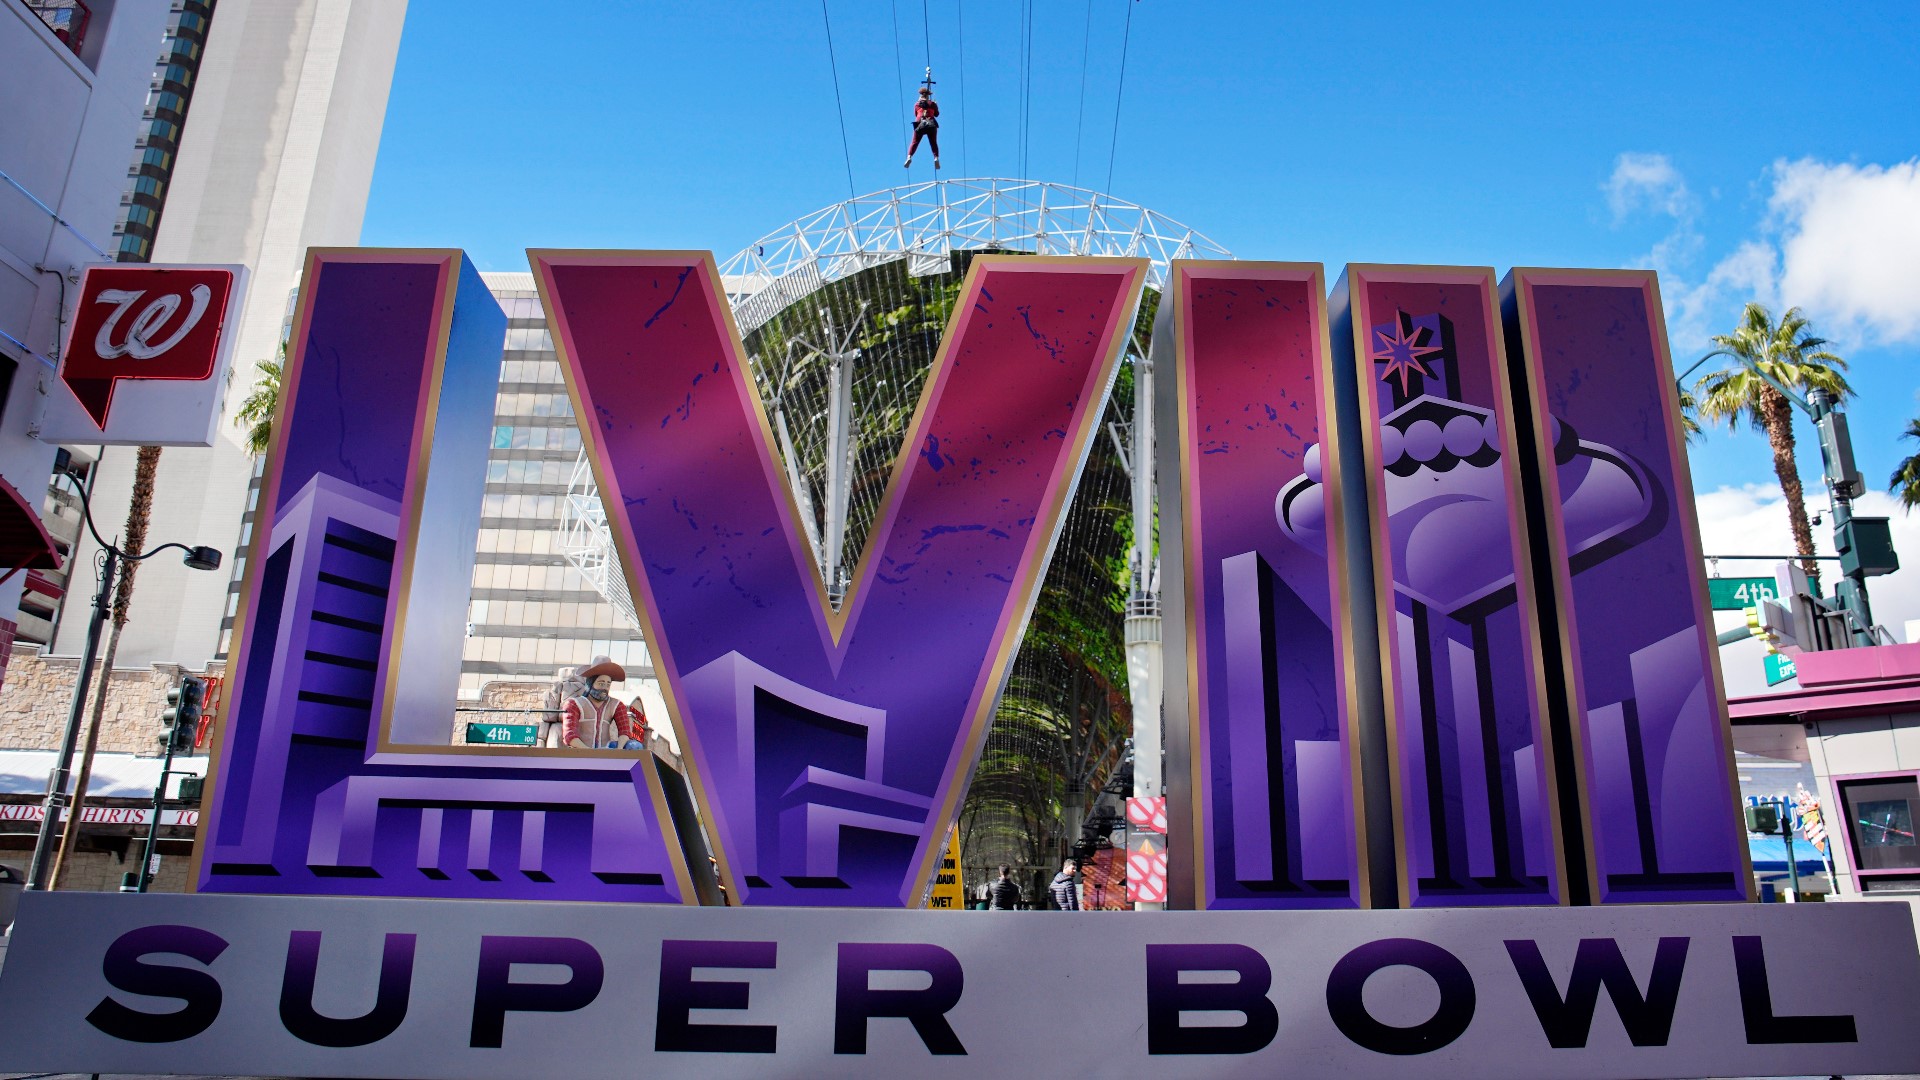 Super Bowl LVIII will feature the San Francisco 49ers and Kansas City Chiefs.